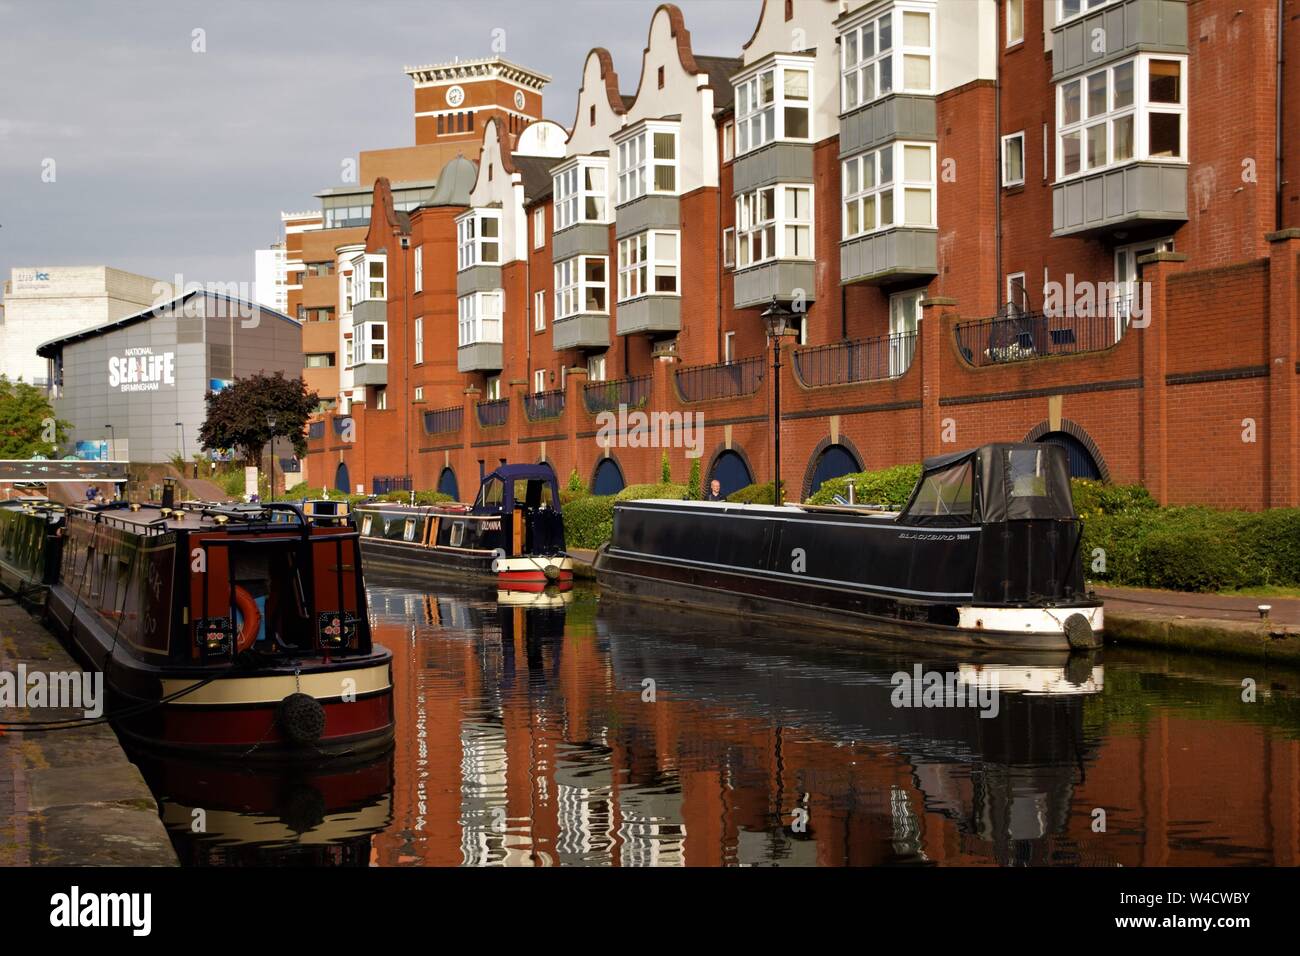 Birmingham England canal views moored narrow boats, bridges over the water, traditional British houses Stock Photo